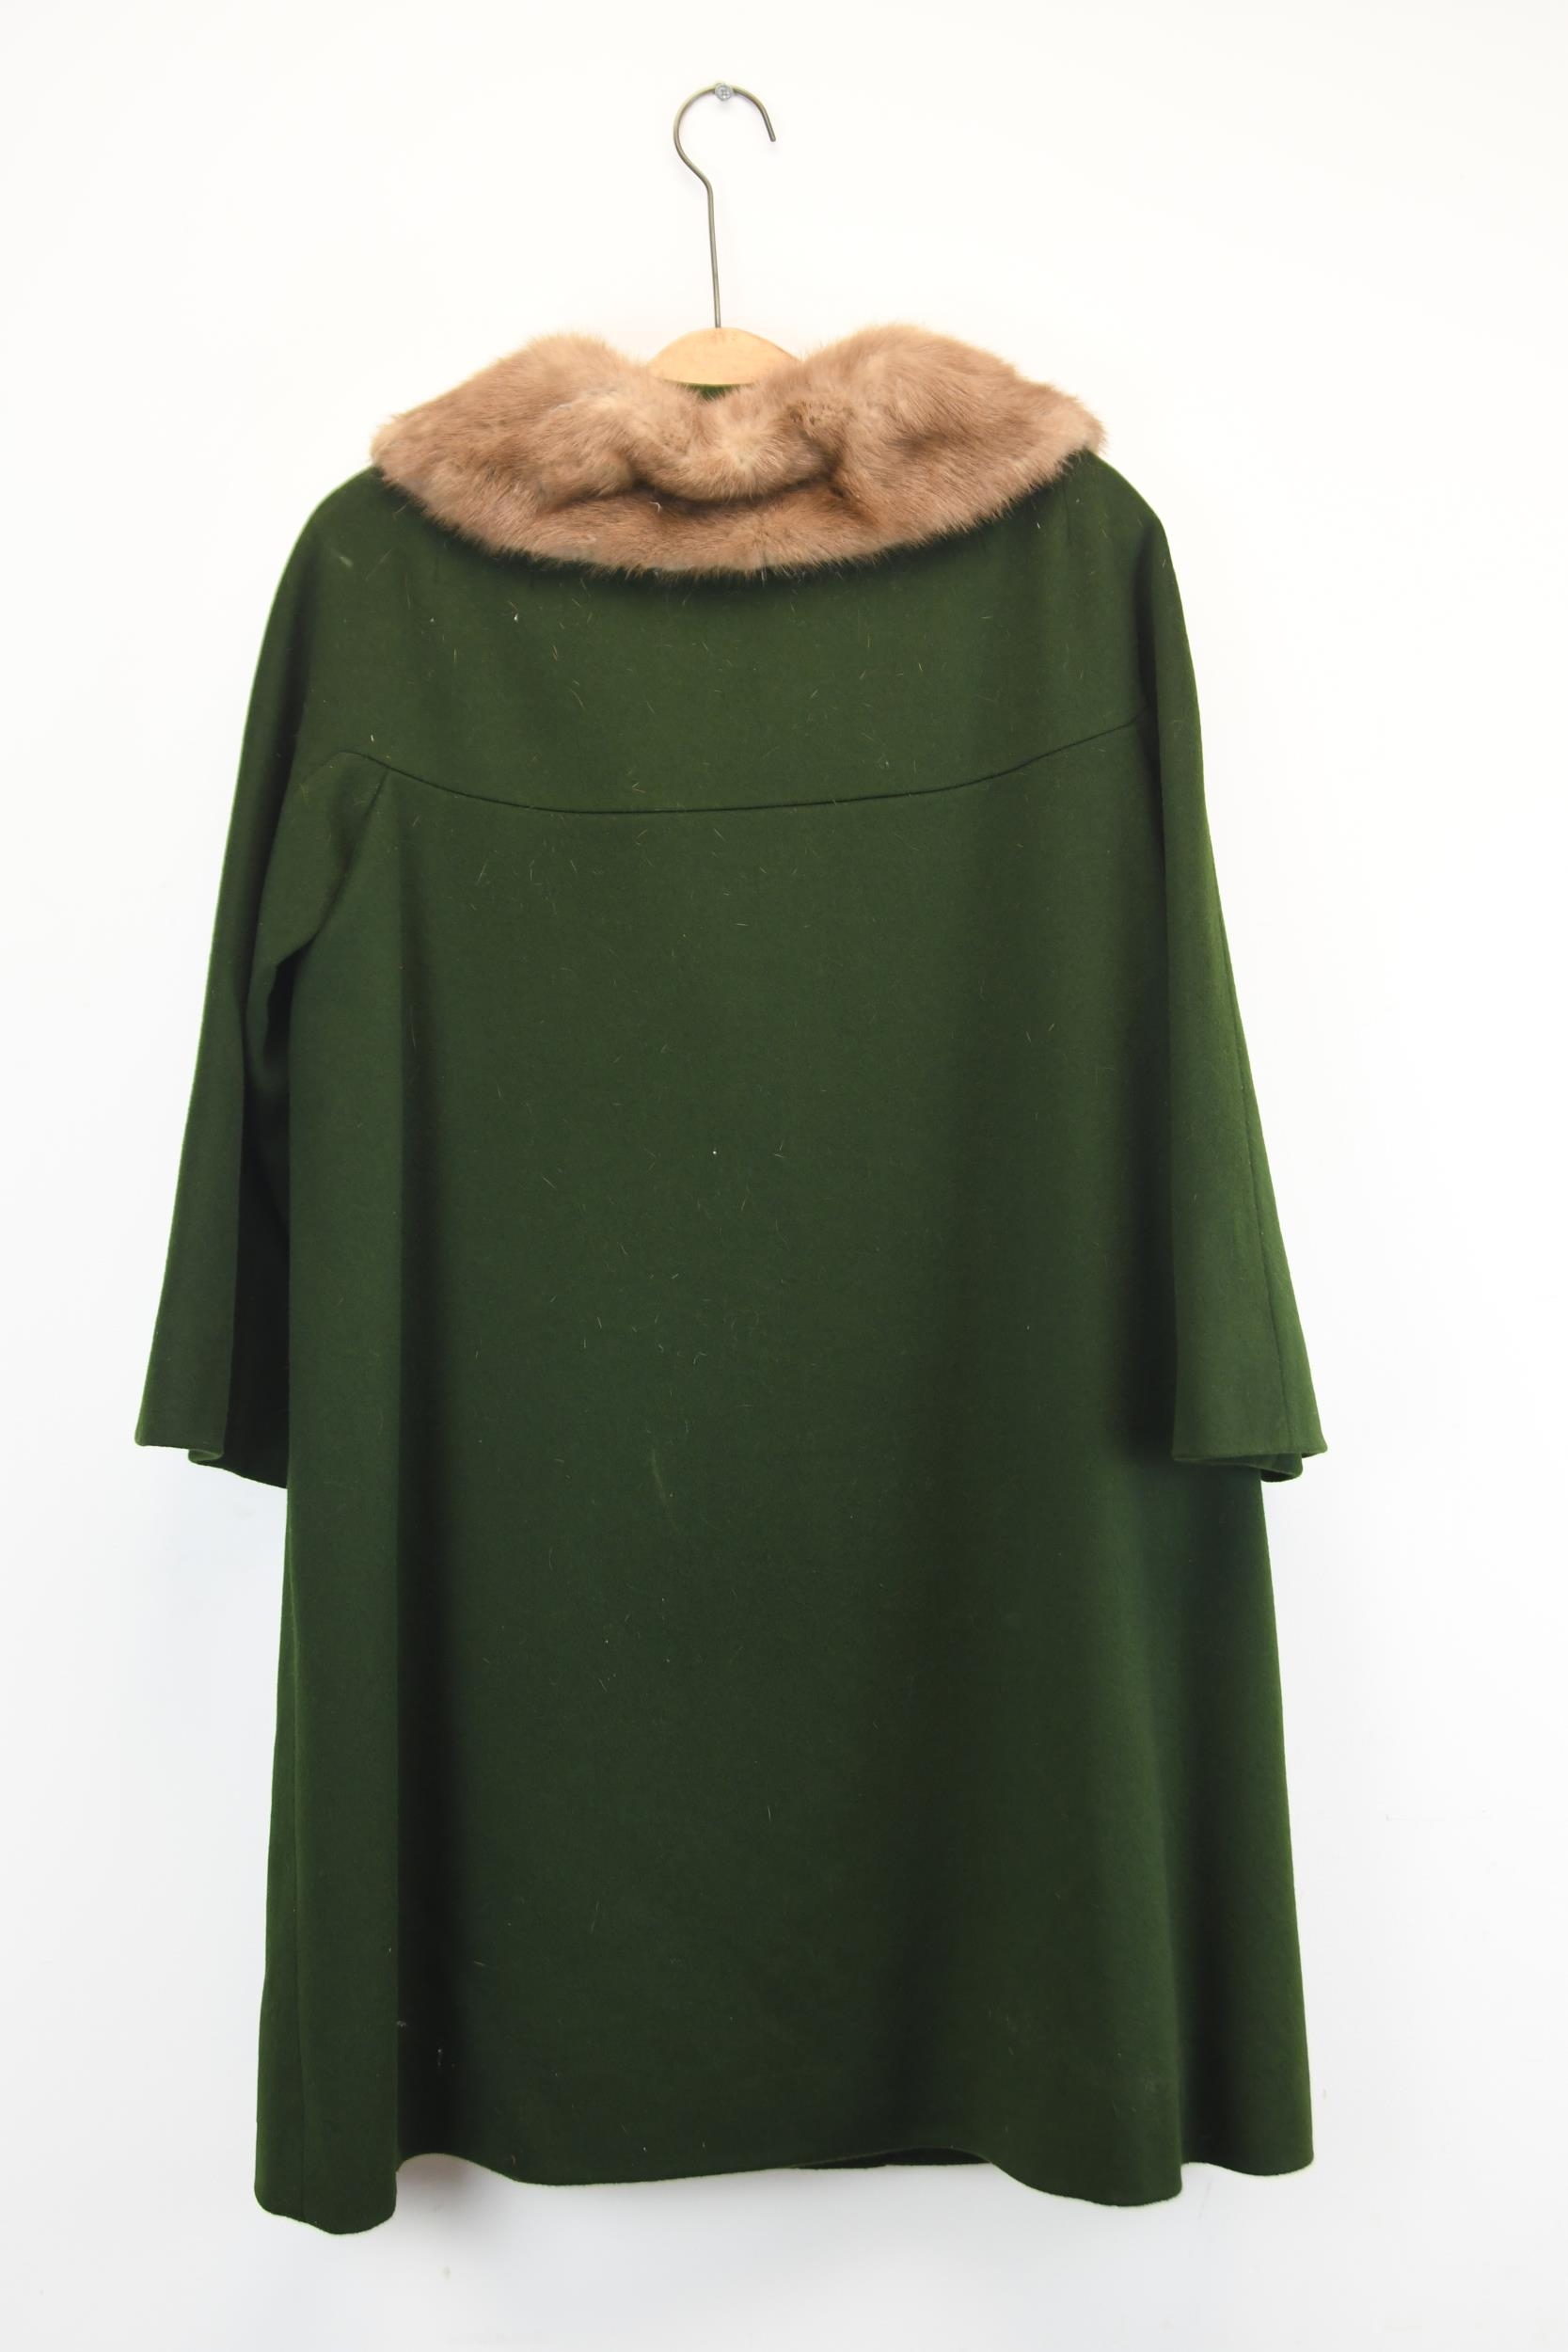 A vintage Harrod's army green women's winter coat with a mink fur collar. Label to interior. - Image 4 of 4